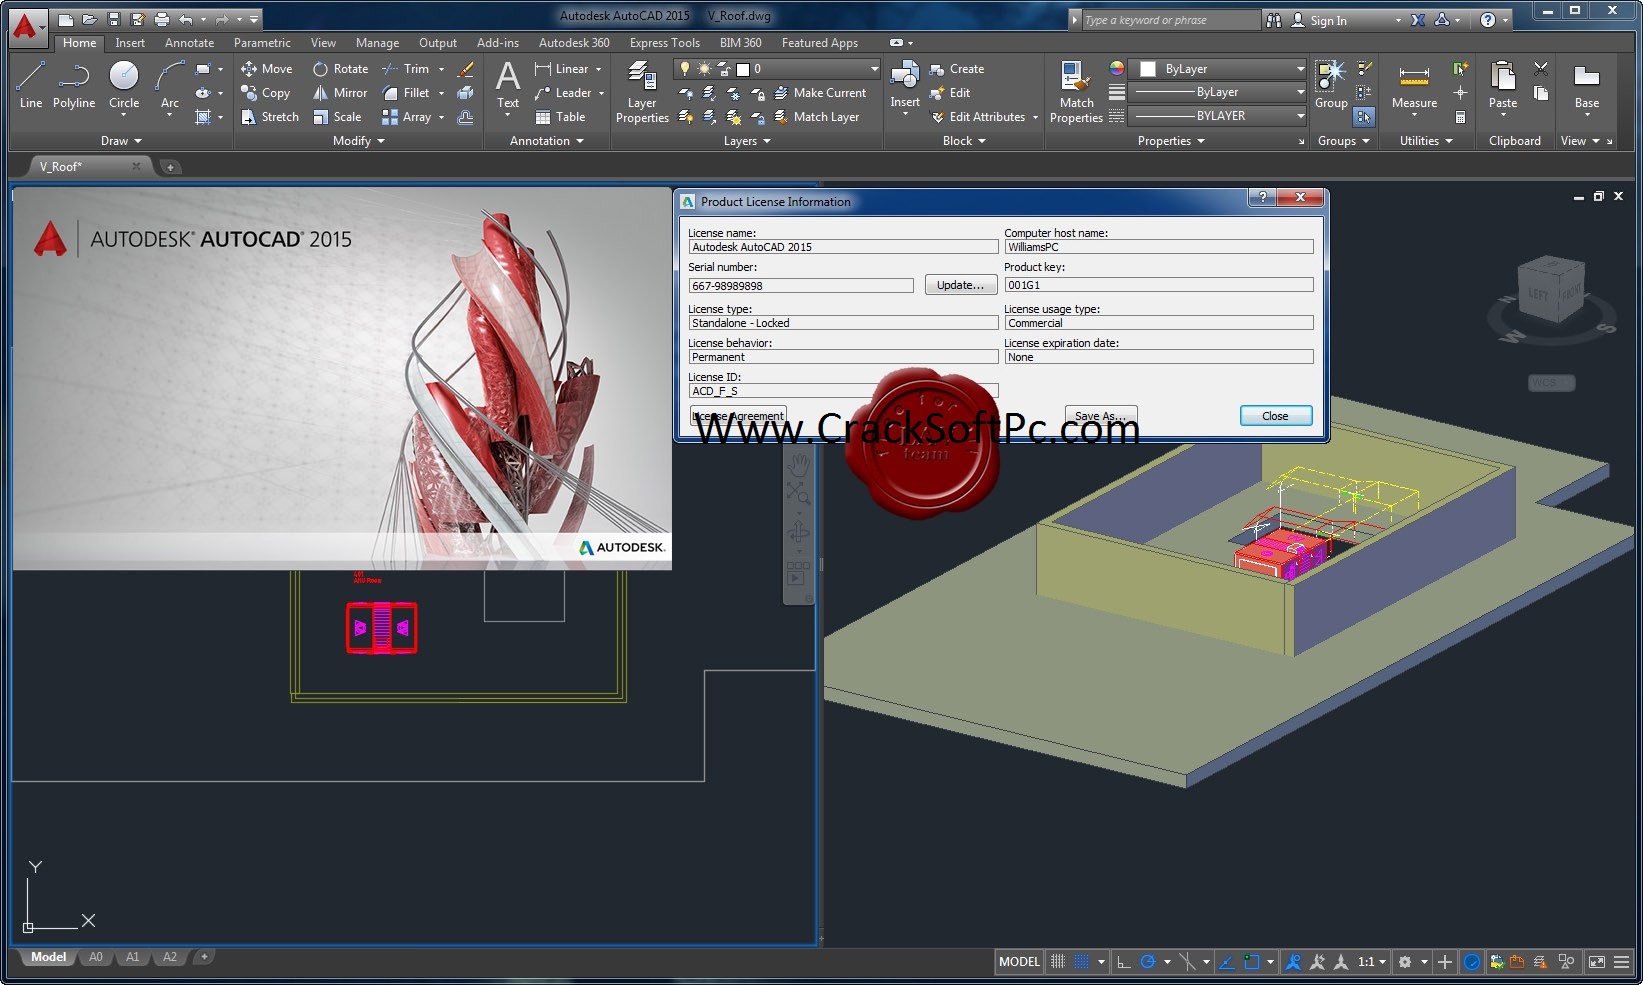 Autodesk Autocad 2016 free. download full Version With Crack